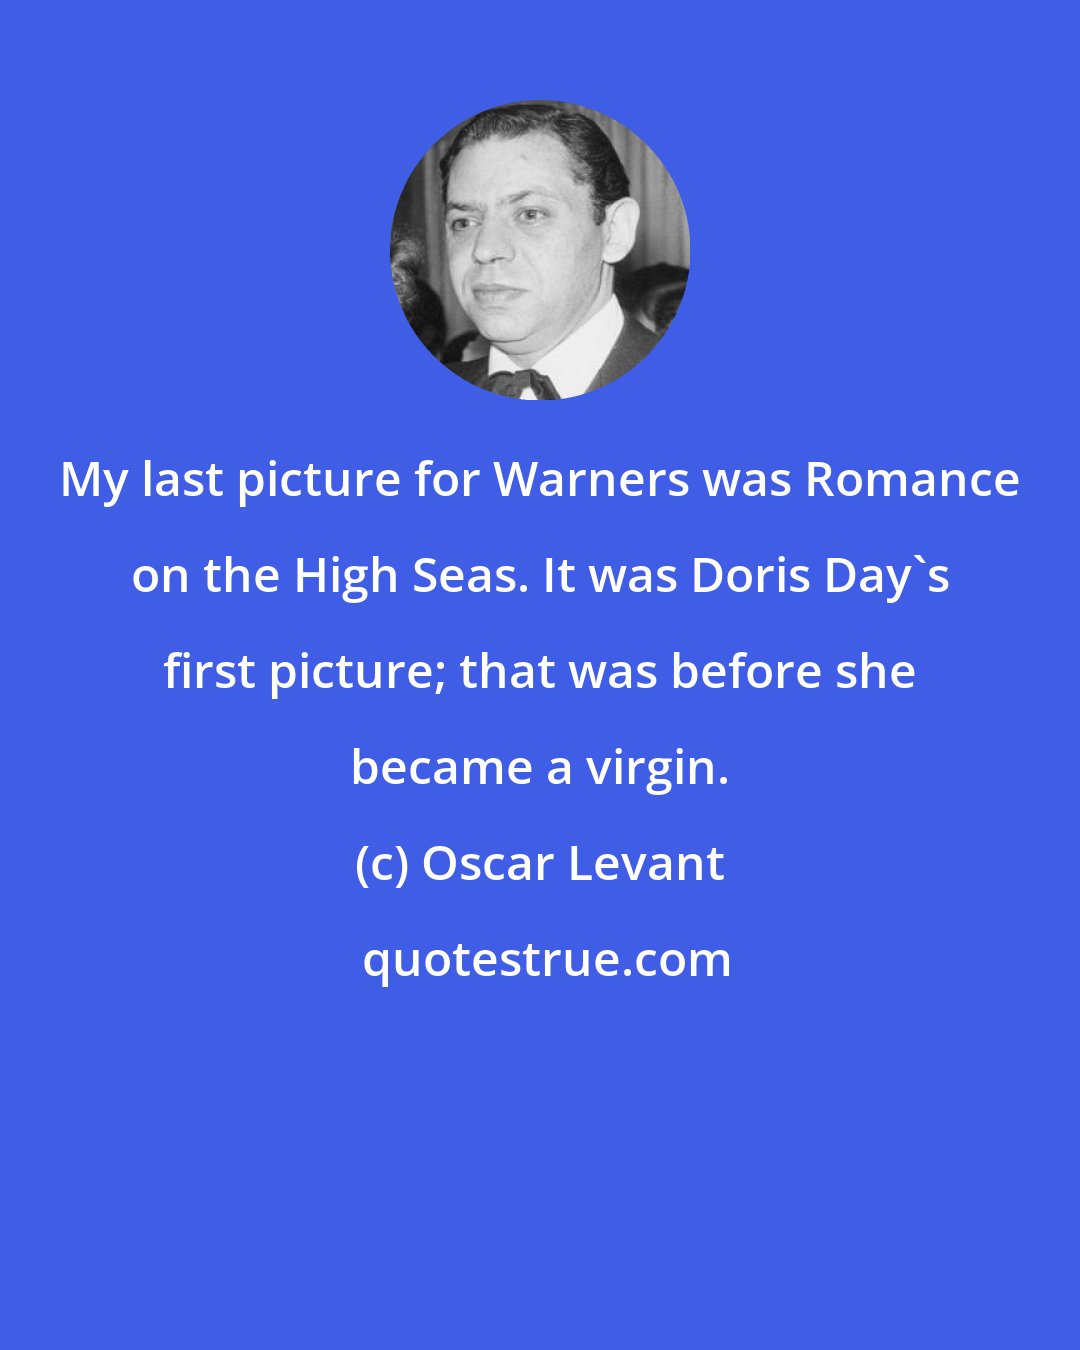 Oscar Levant: My last picture for Warners was Romance on the High Seas. It was Doris Day's first picture; that was before she became a virgin.